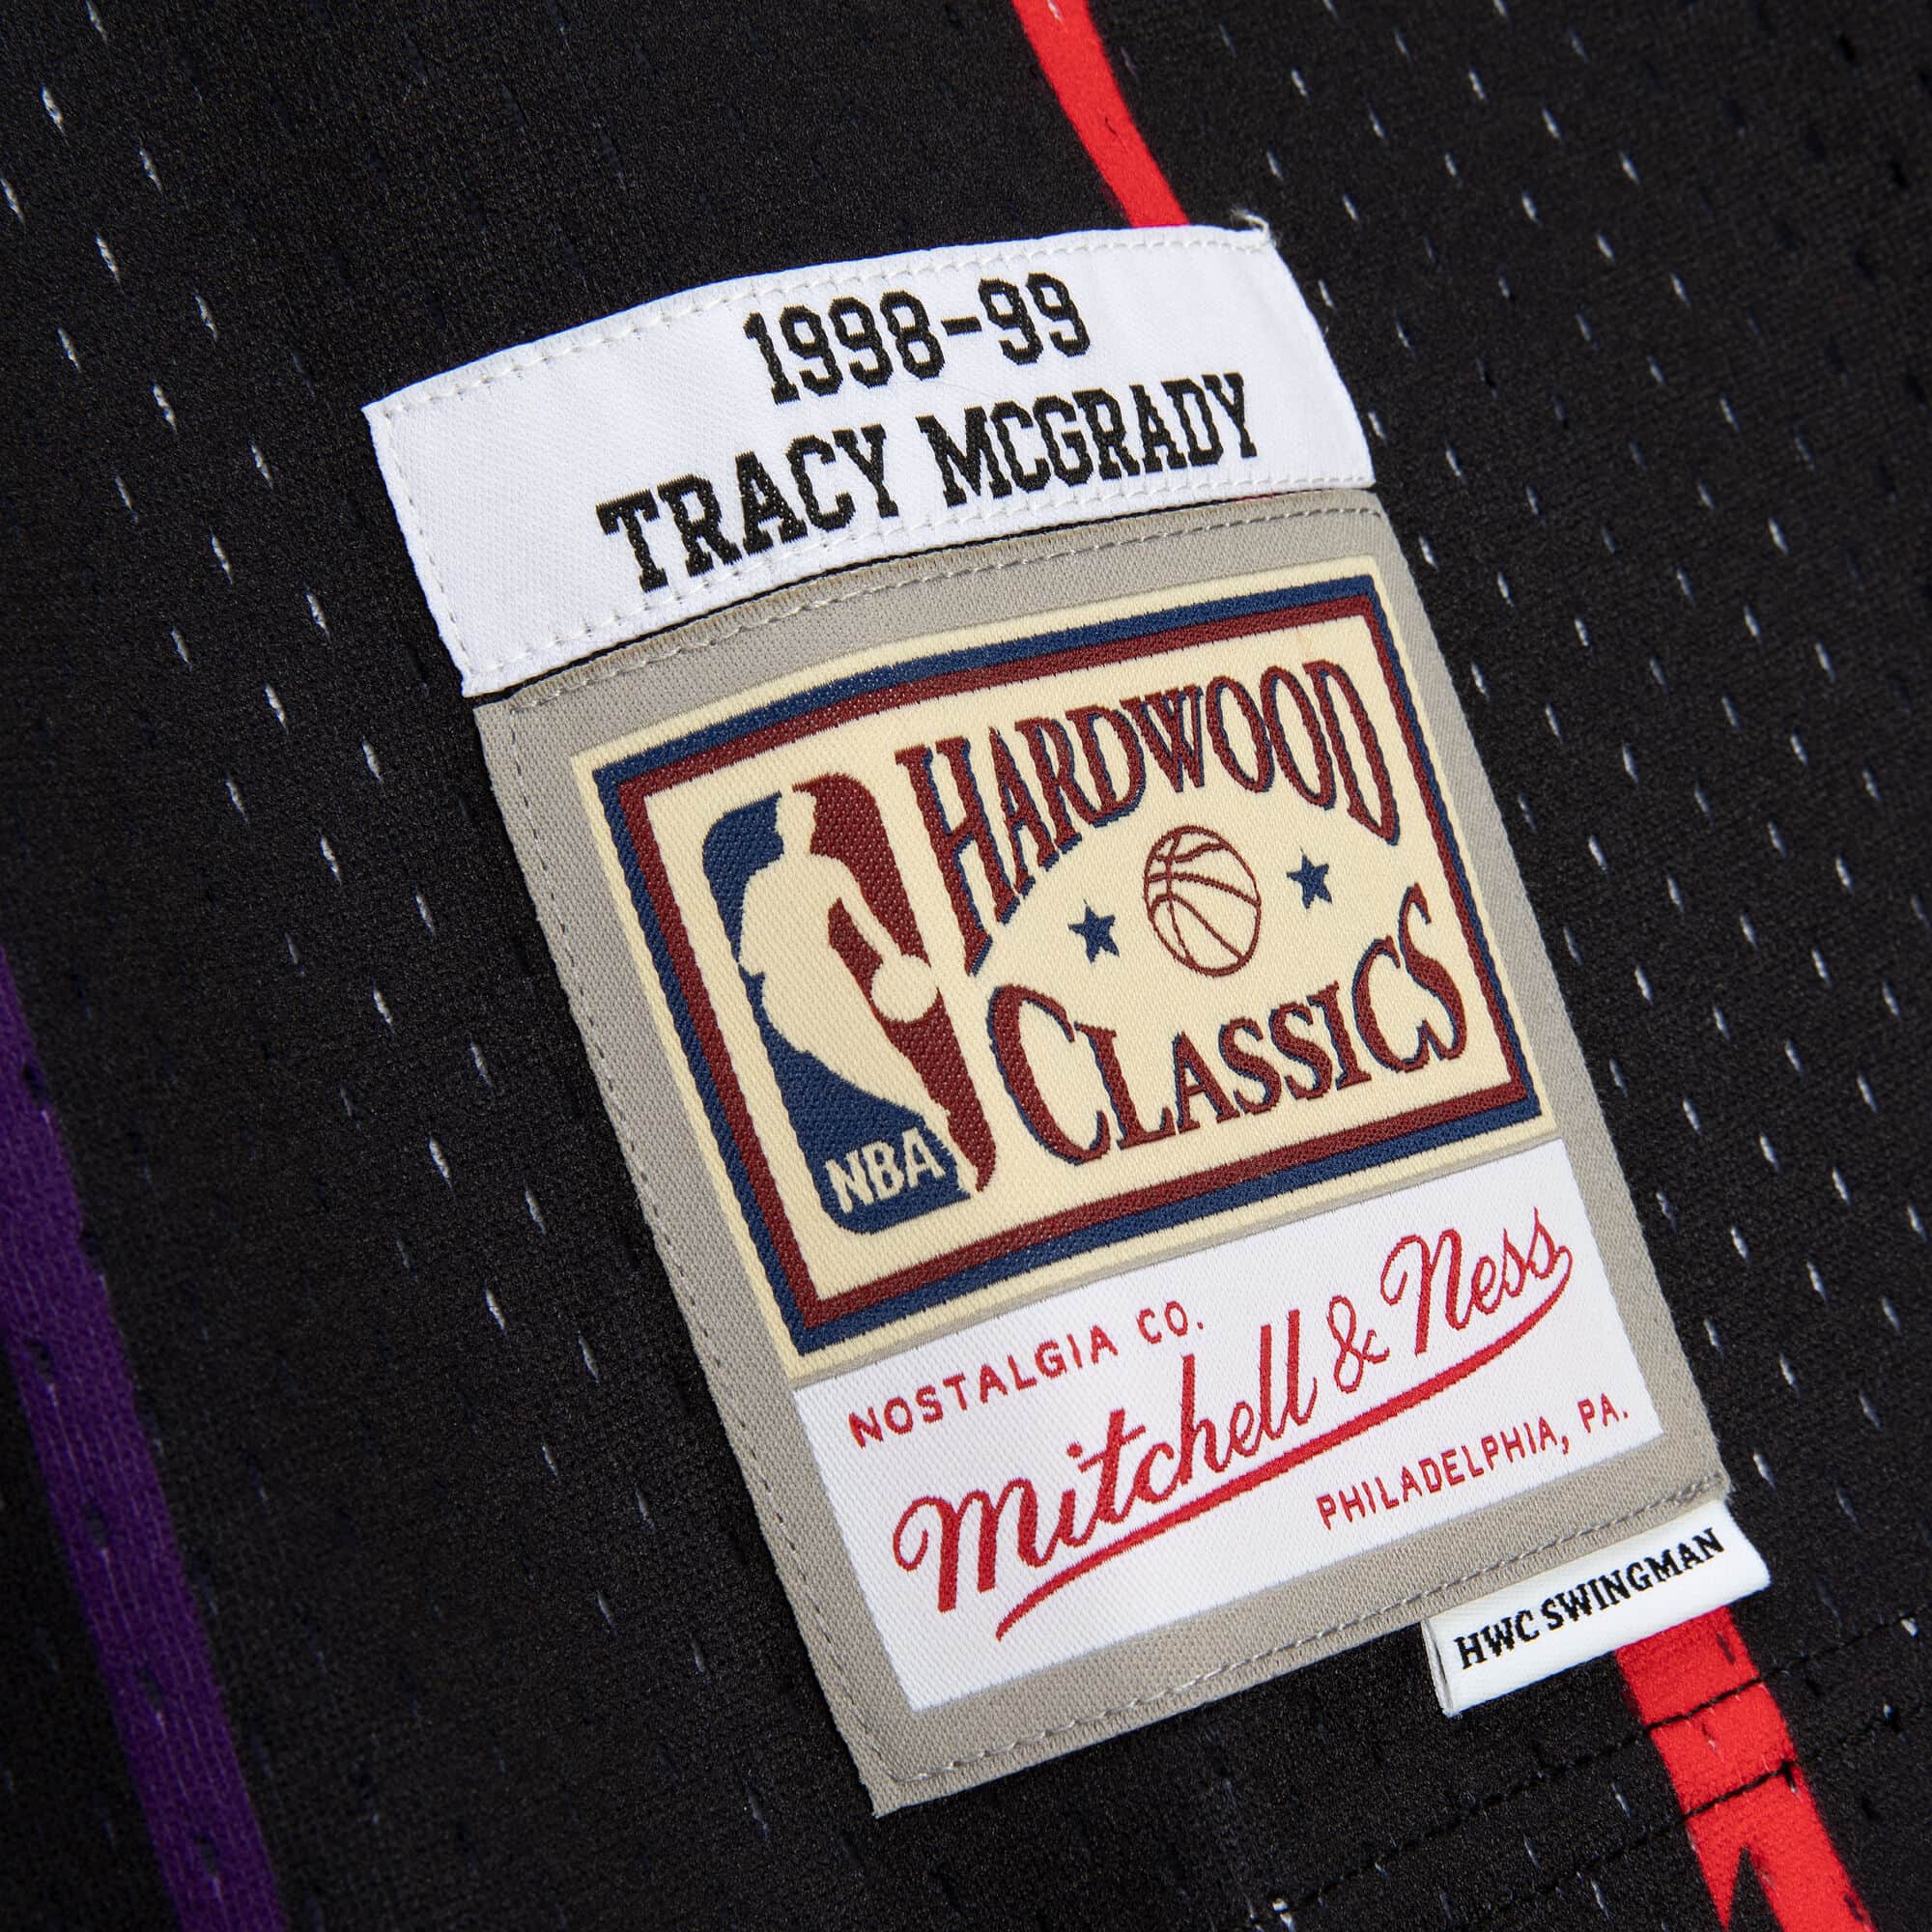 Official tracy mcgrady houston rockets mitchell and ness hardwood